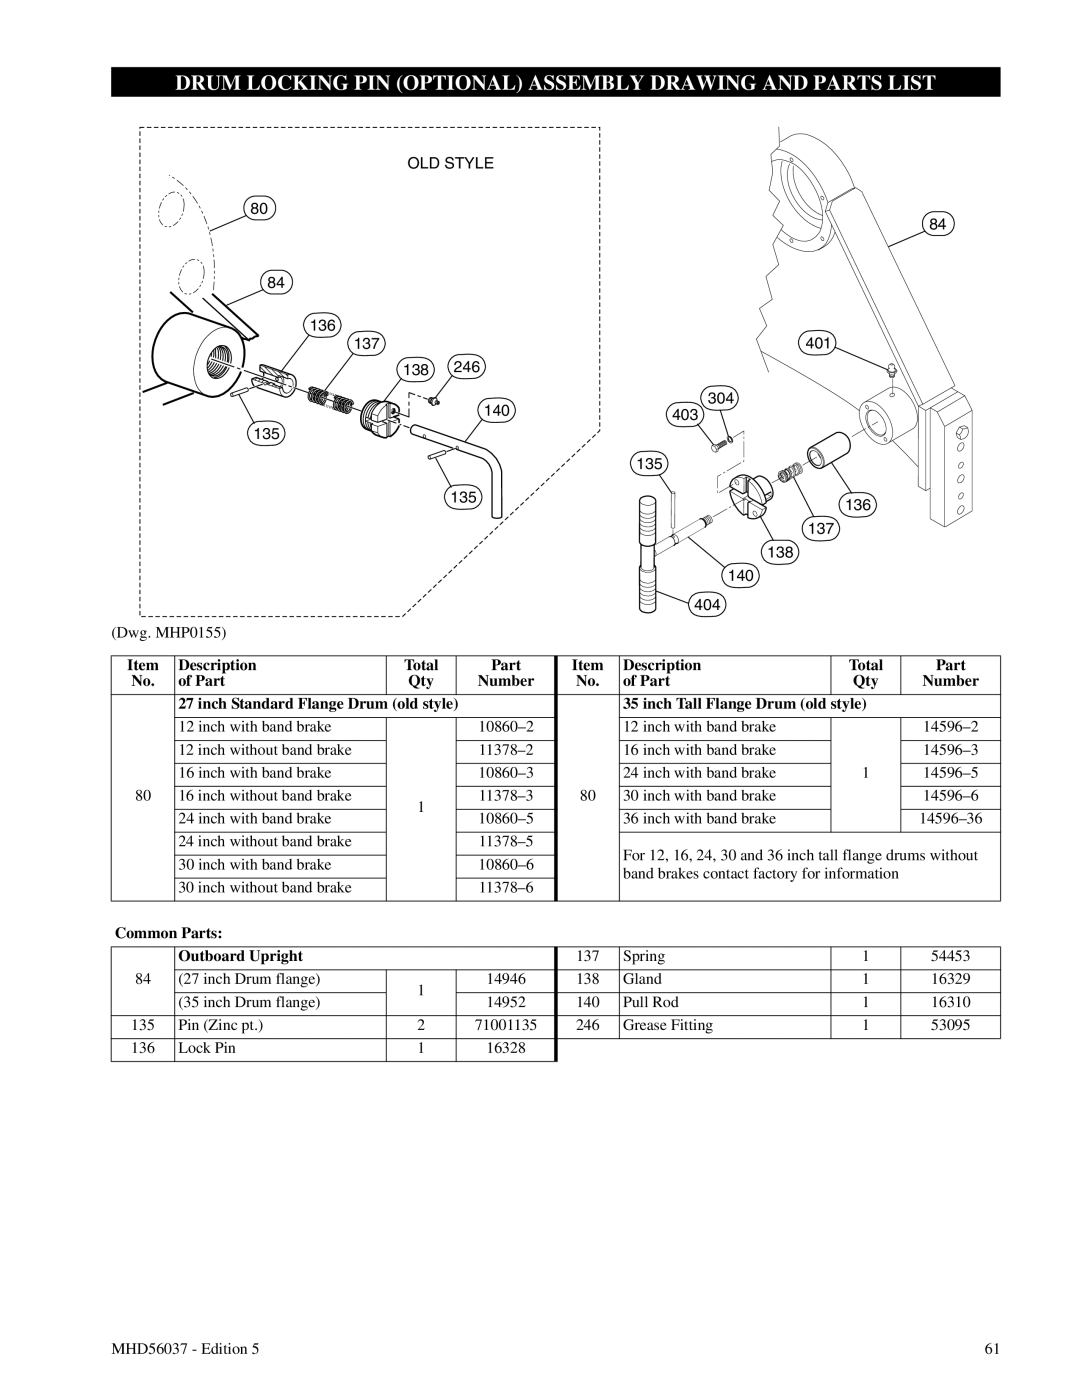 Ingersoll-Rand FA5T manual Drum Locking Pin Optional Assembly Drawing And Parts List, Description, of Part, Number 